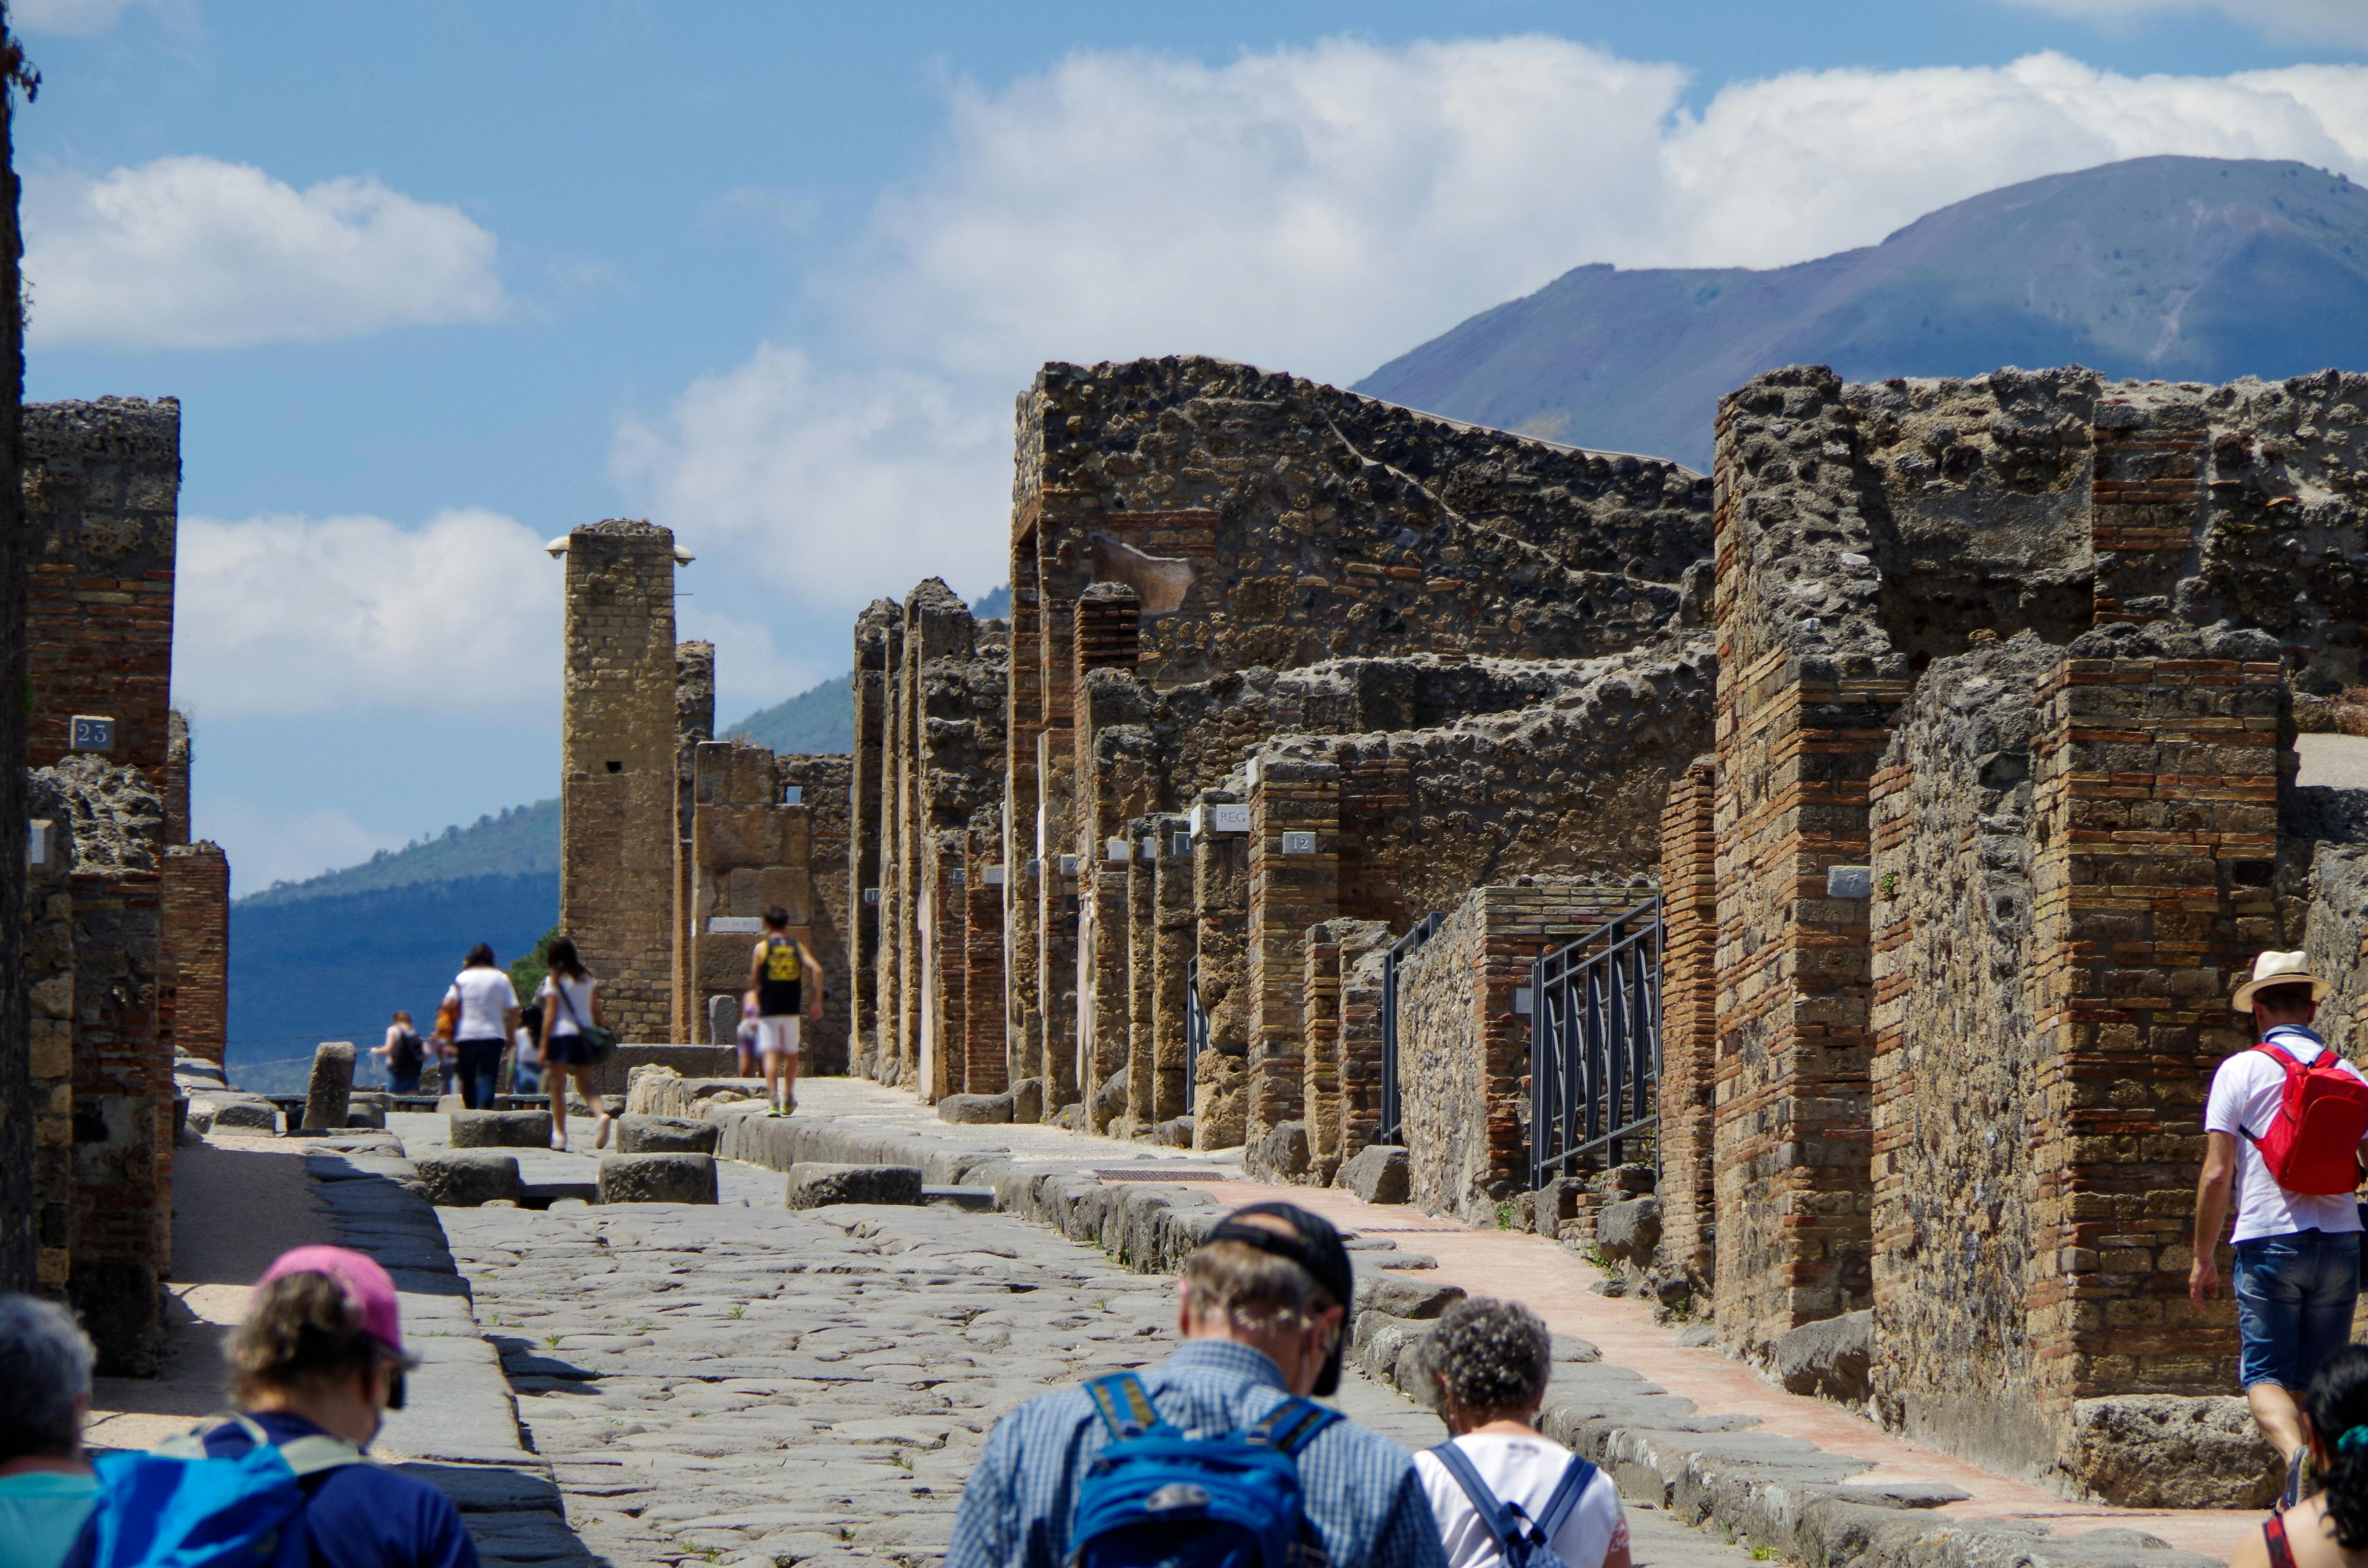 Pompeii guided tour with skip-the-line ticket